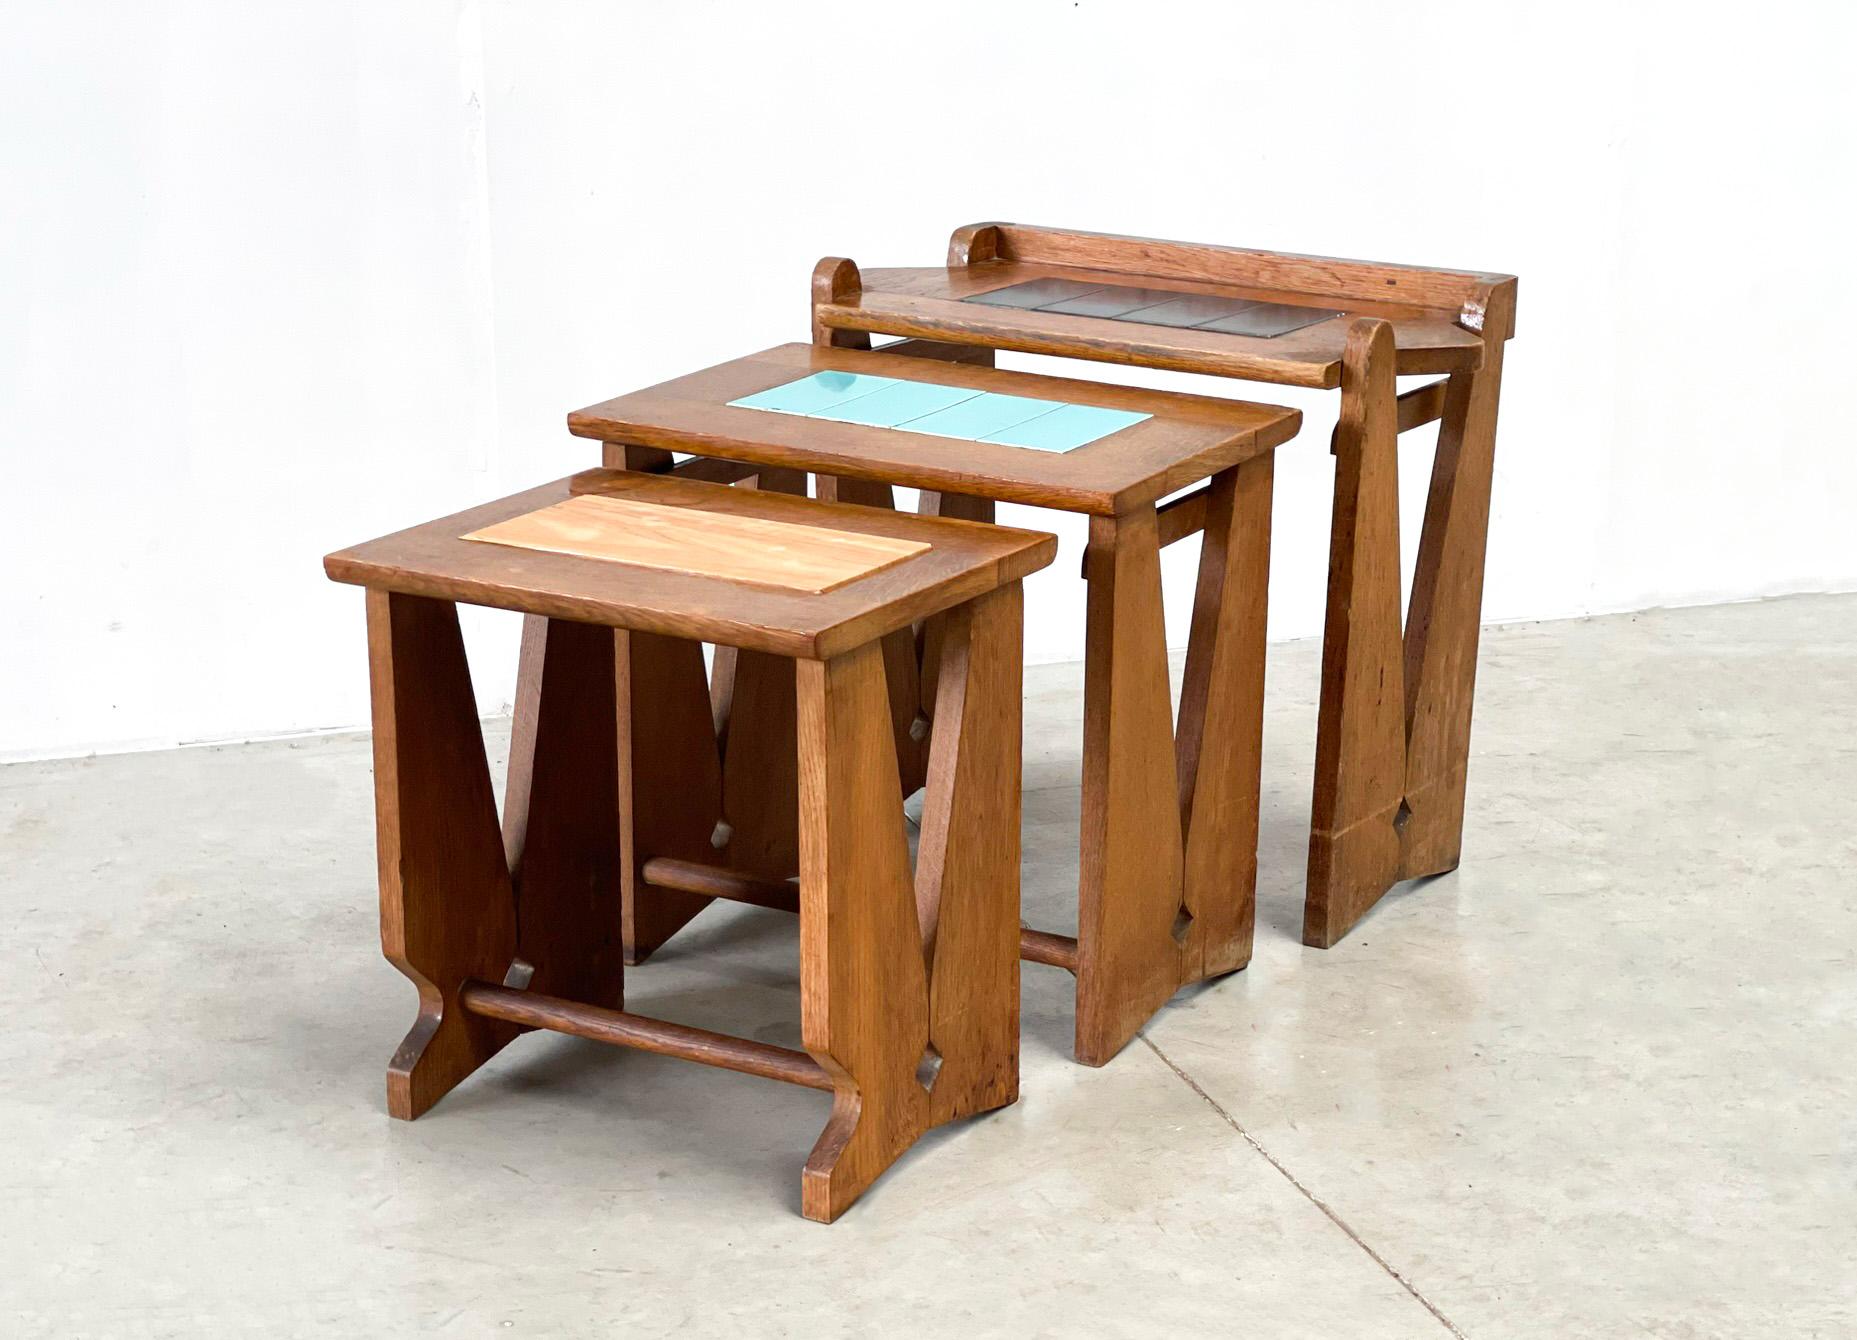 3 French nesting tables made by famous designers Guillerme & Chambron. The tables are from the 70s from france. They have an oak frame and a ceramic tile on top. Only one of them has a piece of wood with veneer.Guillerme & Chambron are best known